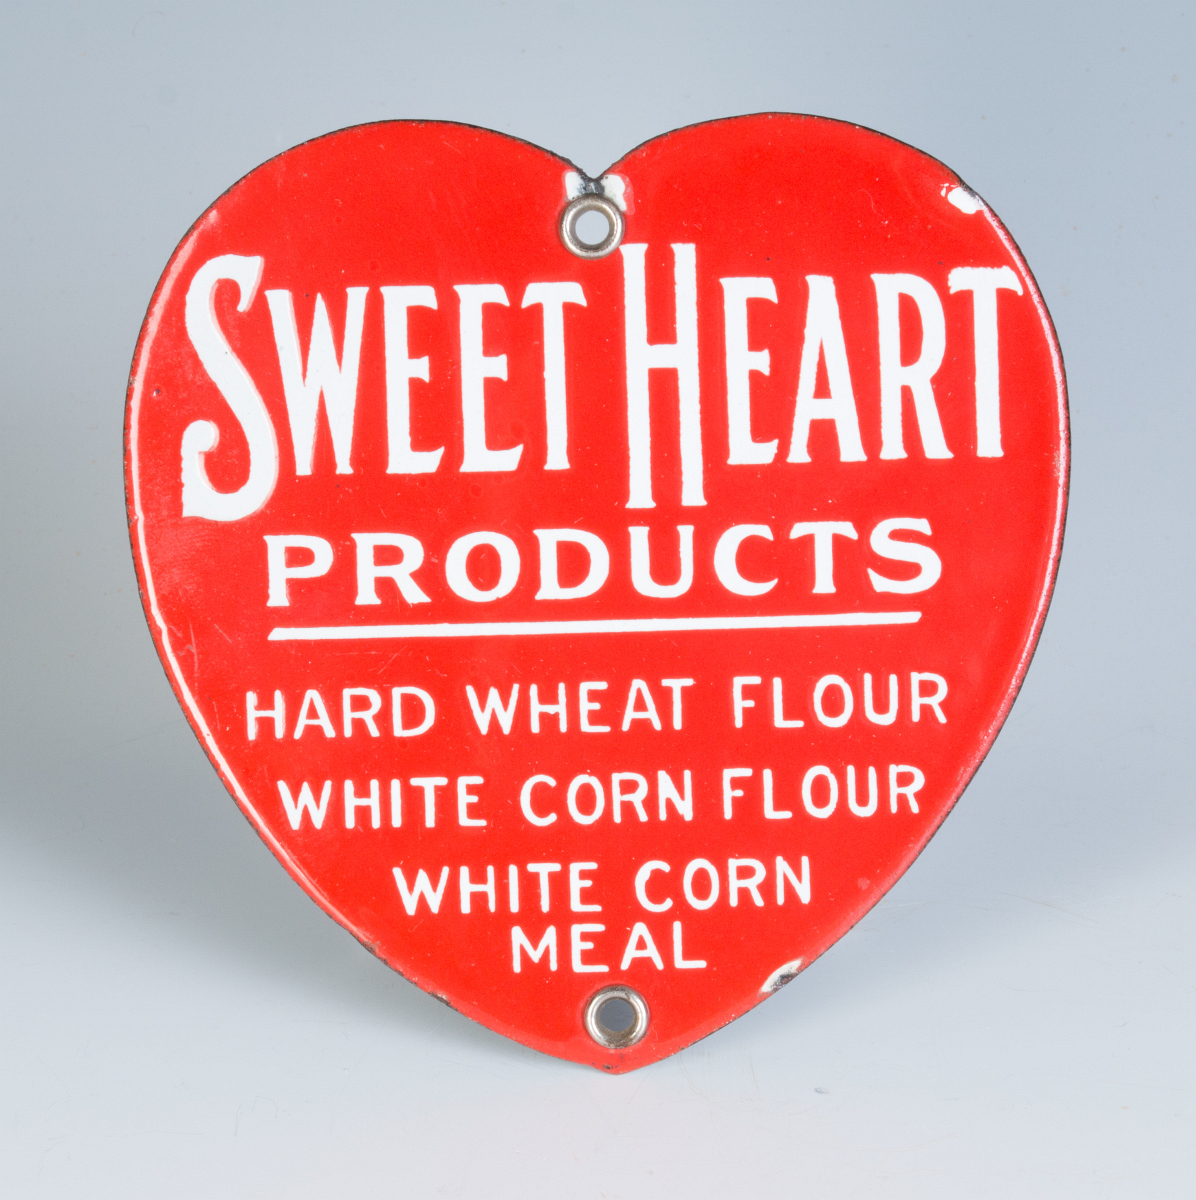 SWEET HEART PRODUCTS PORCELAIN HEART SHAPE SIGN